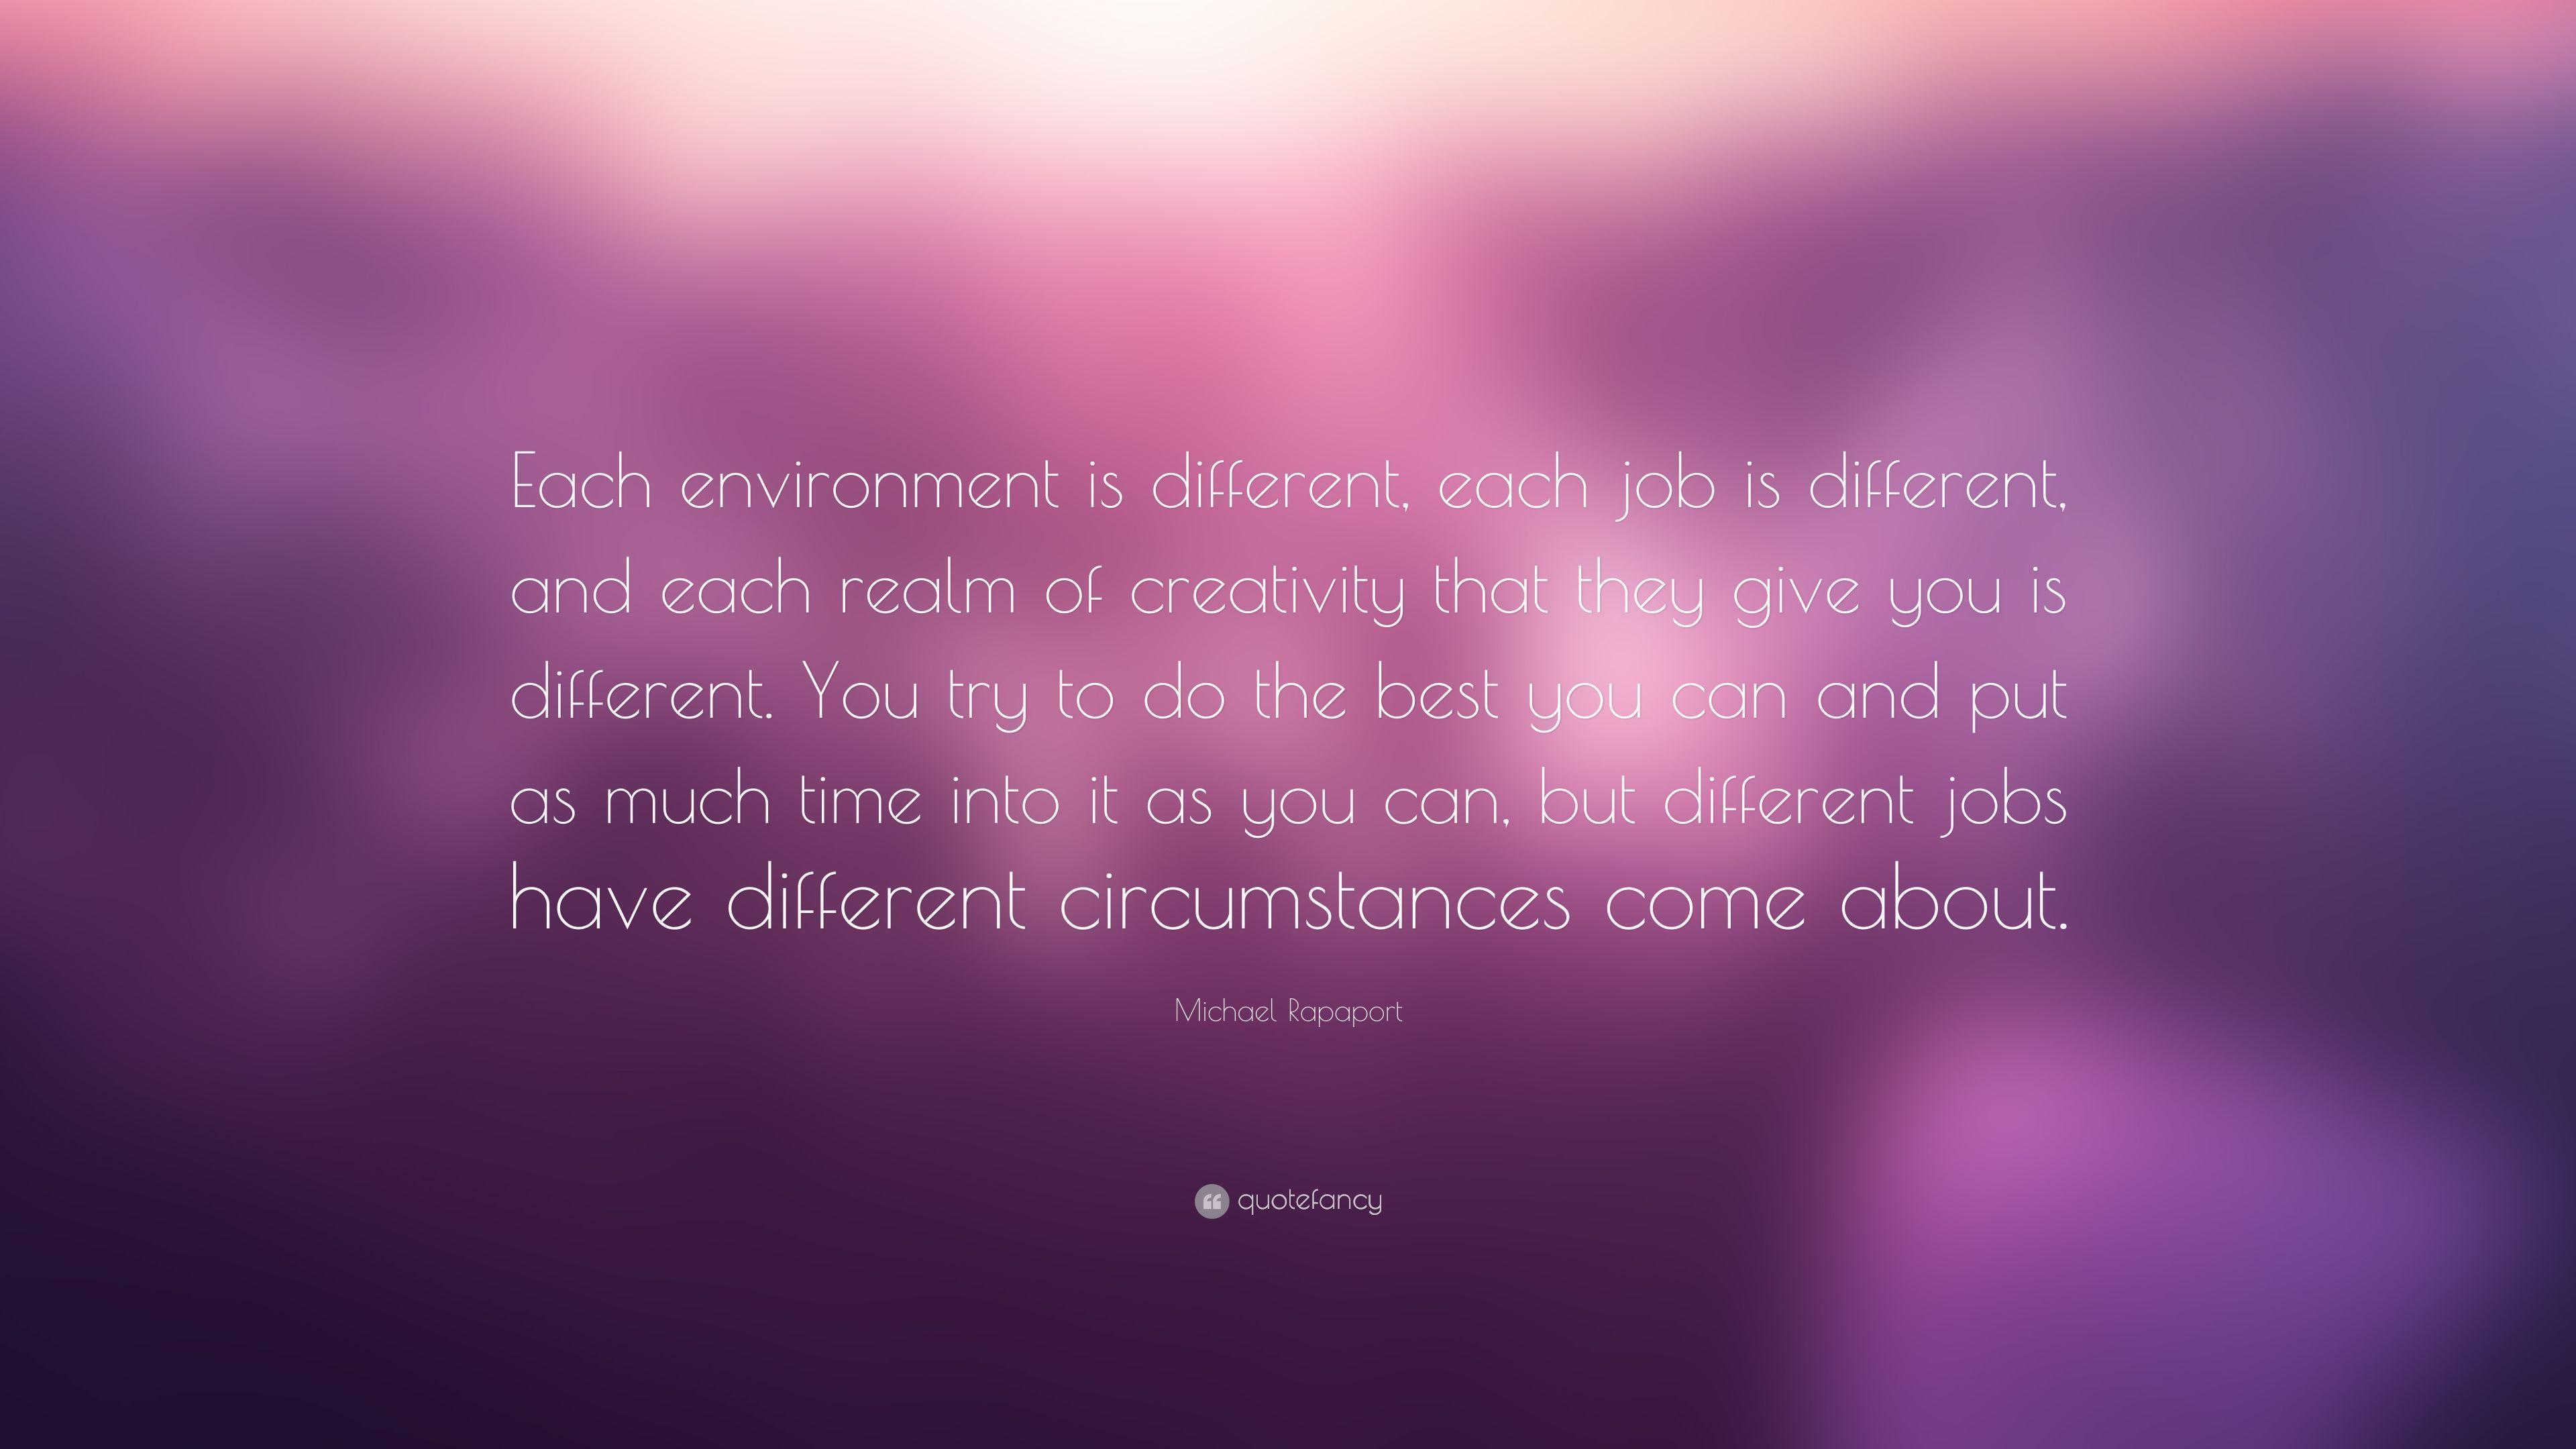 Michael Rapaport Quote: “Each environment is different, each job